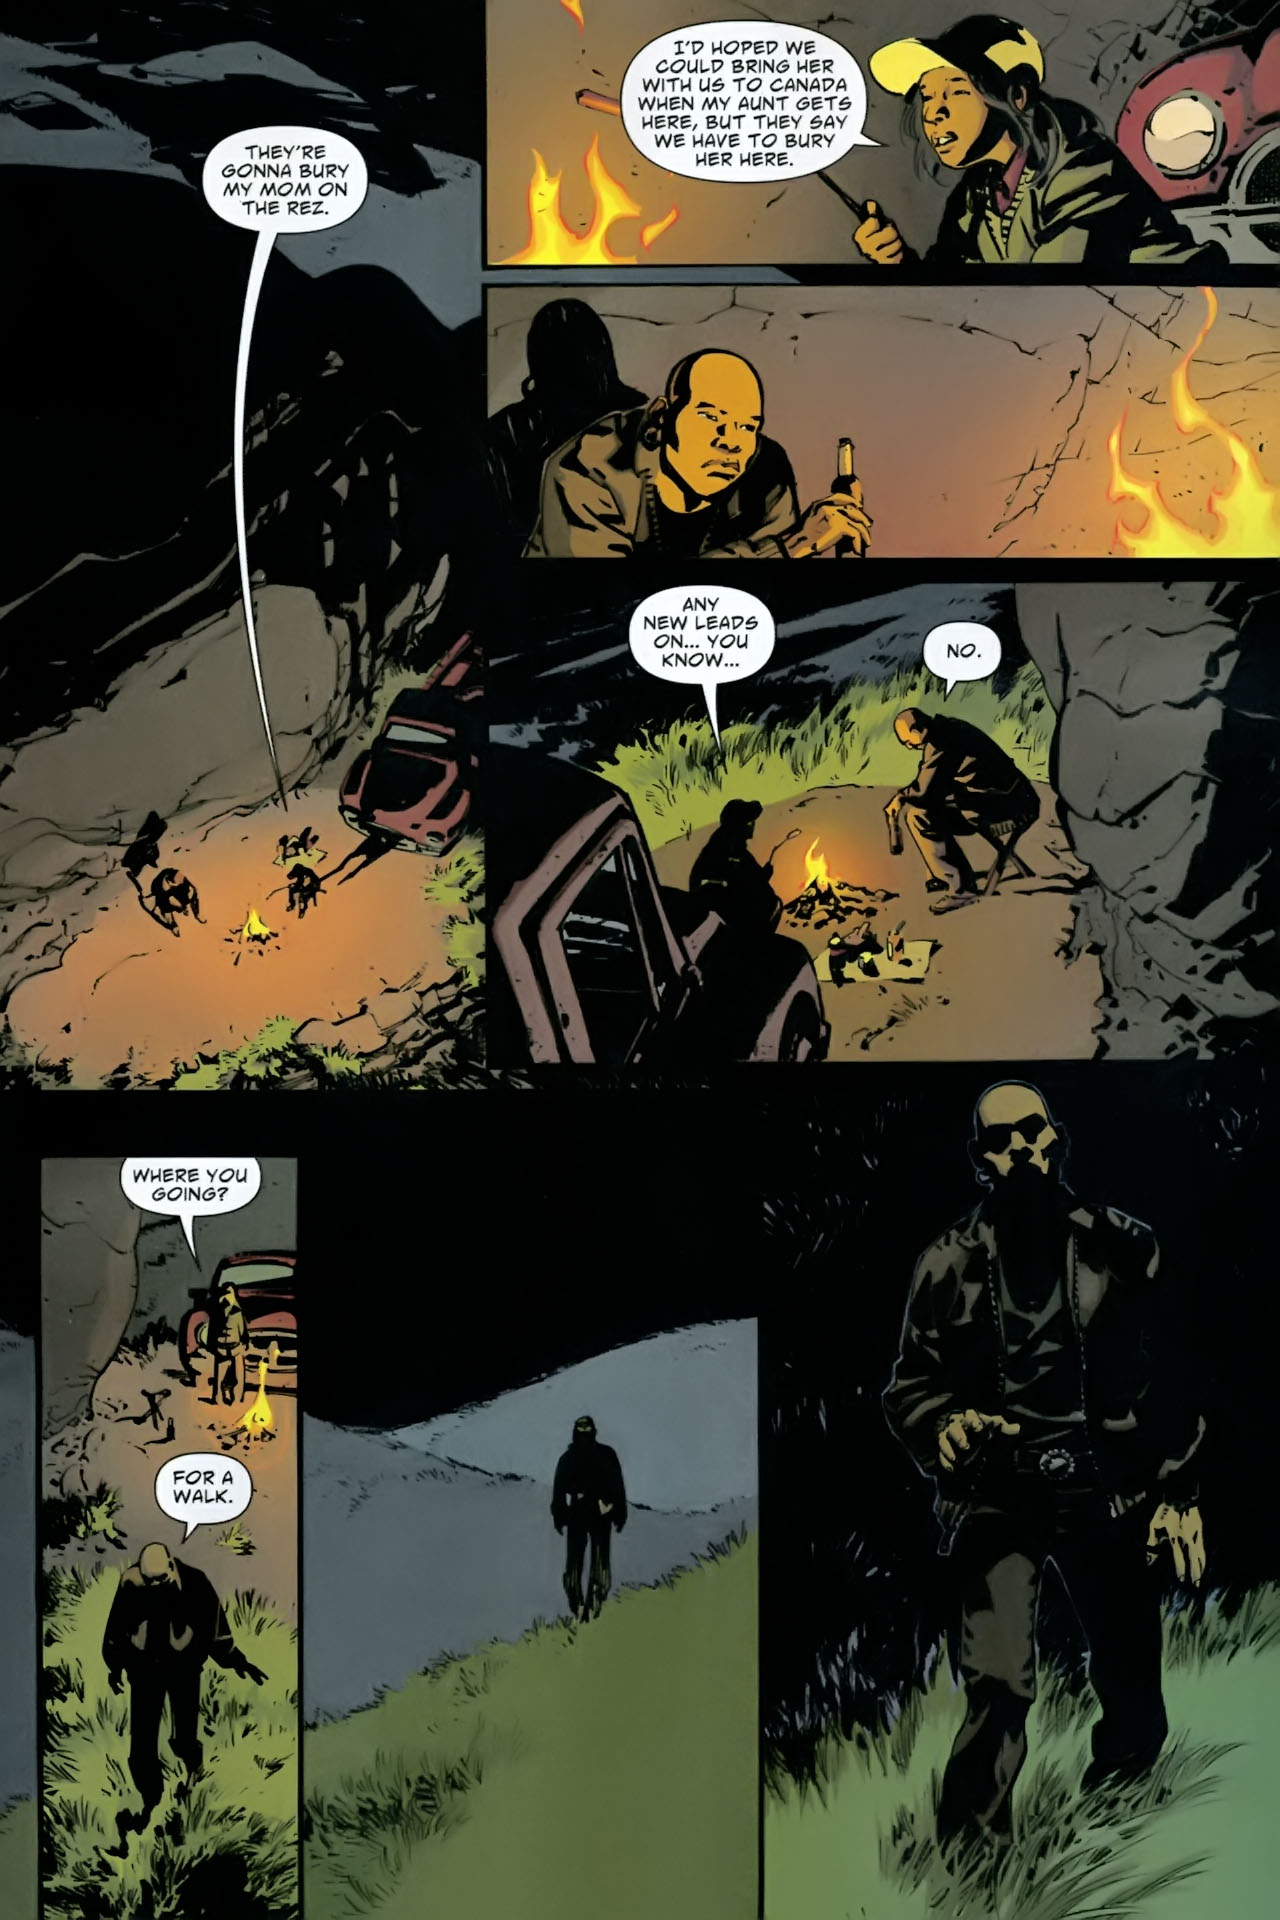 Scalped #15 - Dead Mothers, Part 3 of 5 